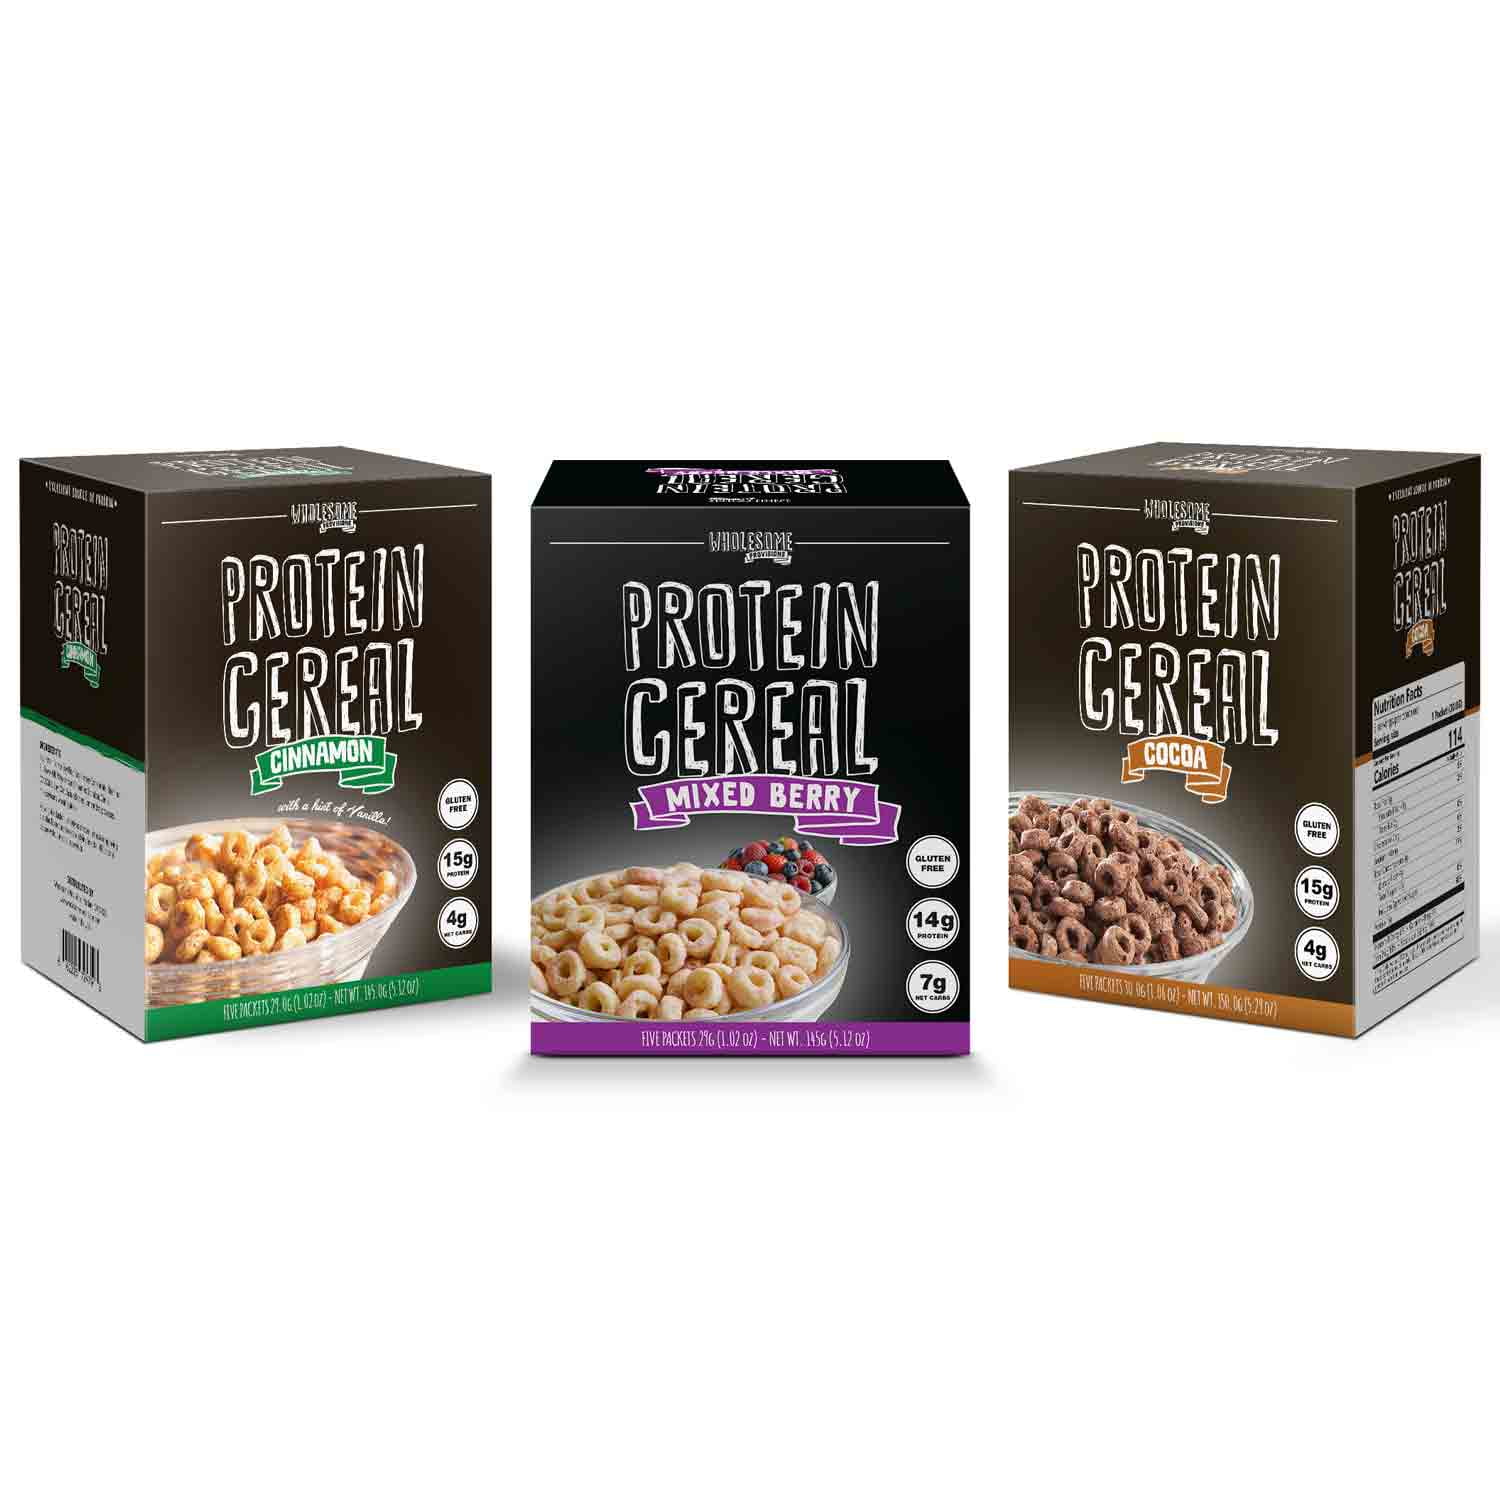 Protein Cereal, Low Carb Cereal, High Protein Cereal, 15g Protein, 4g